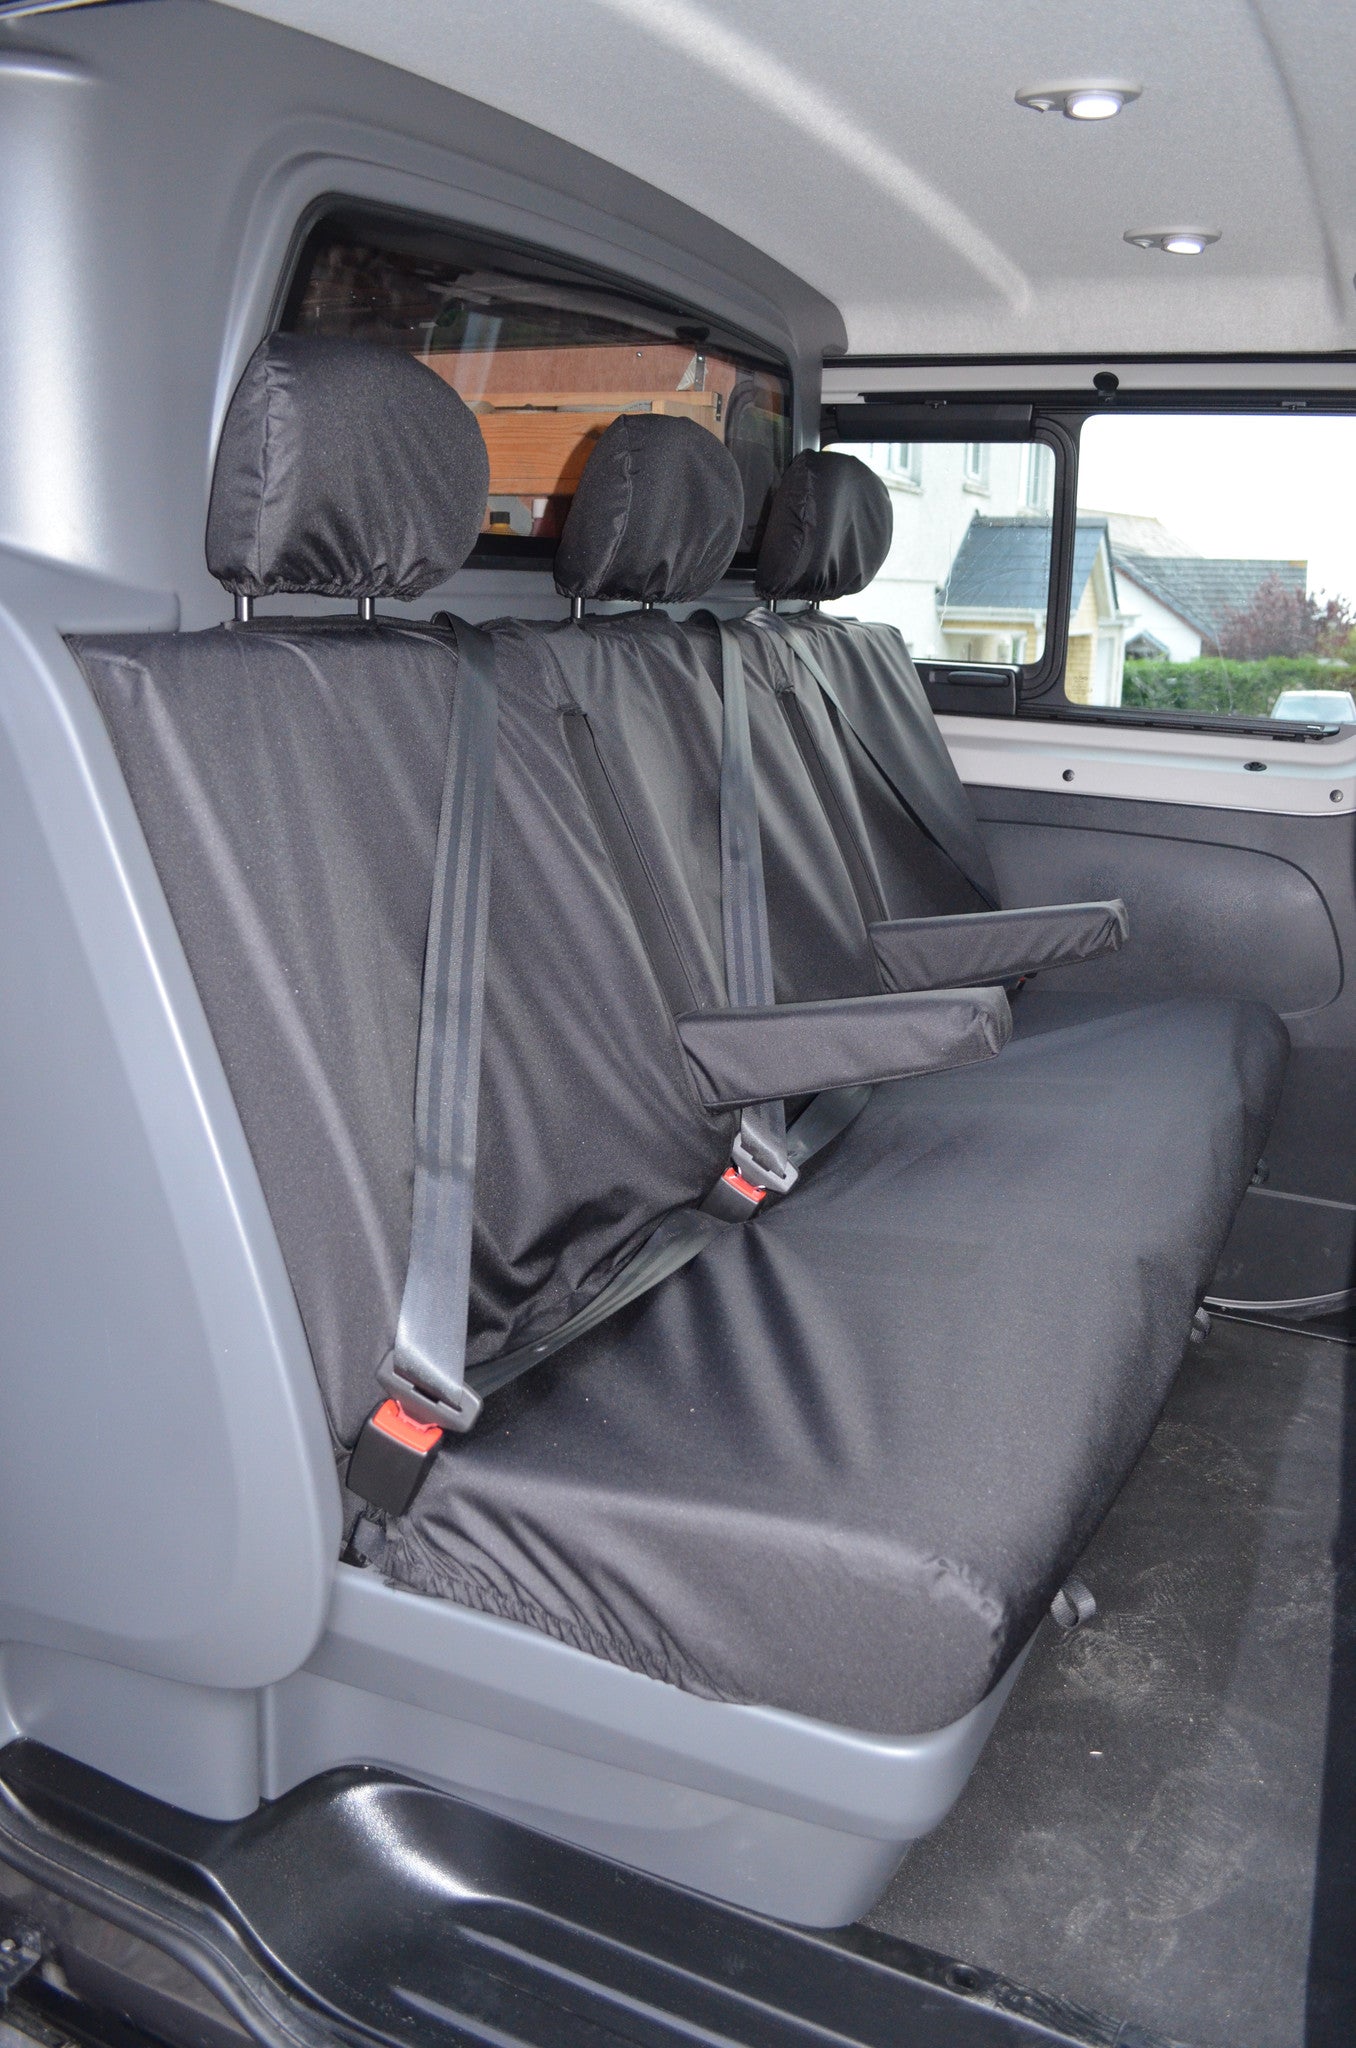 renault trafic sport seat covers 2017